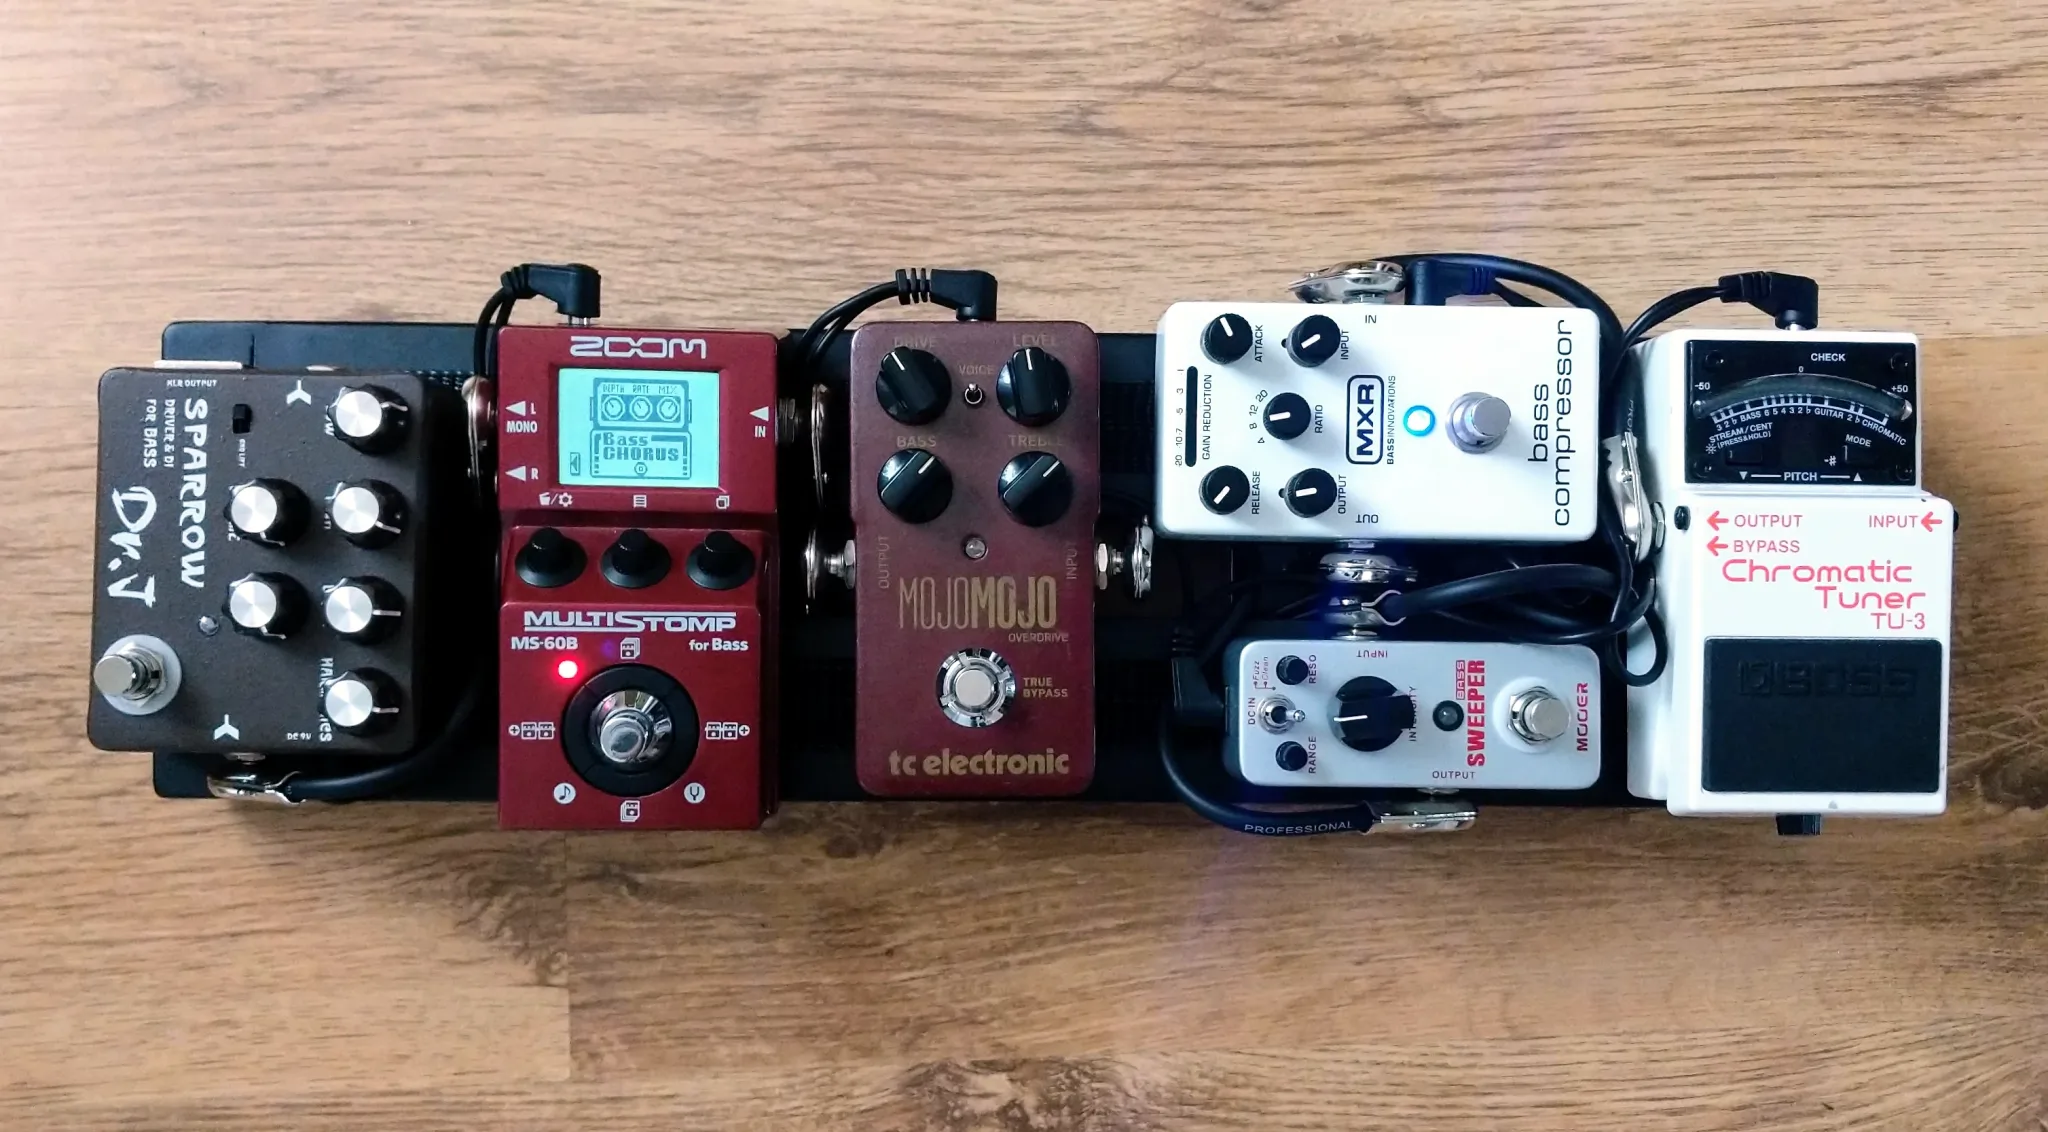 A small pedal board
with half a dozen effects pedals on it. The lights are on, but there are no
cables supplying power from elsewhere.